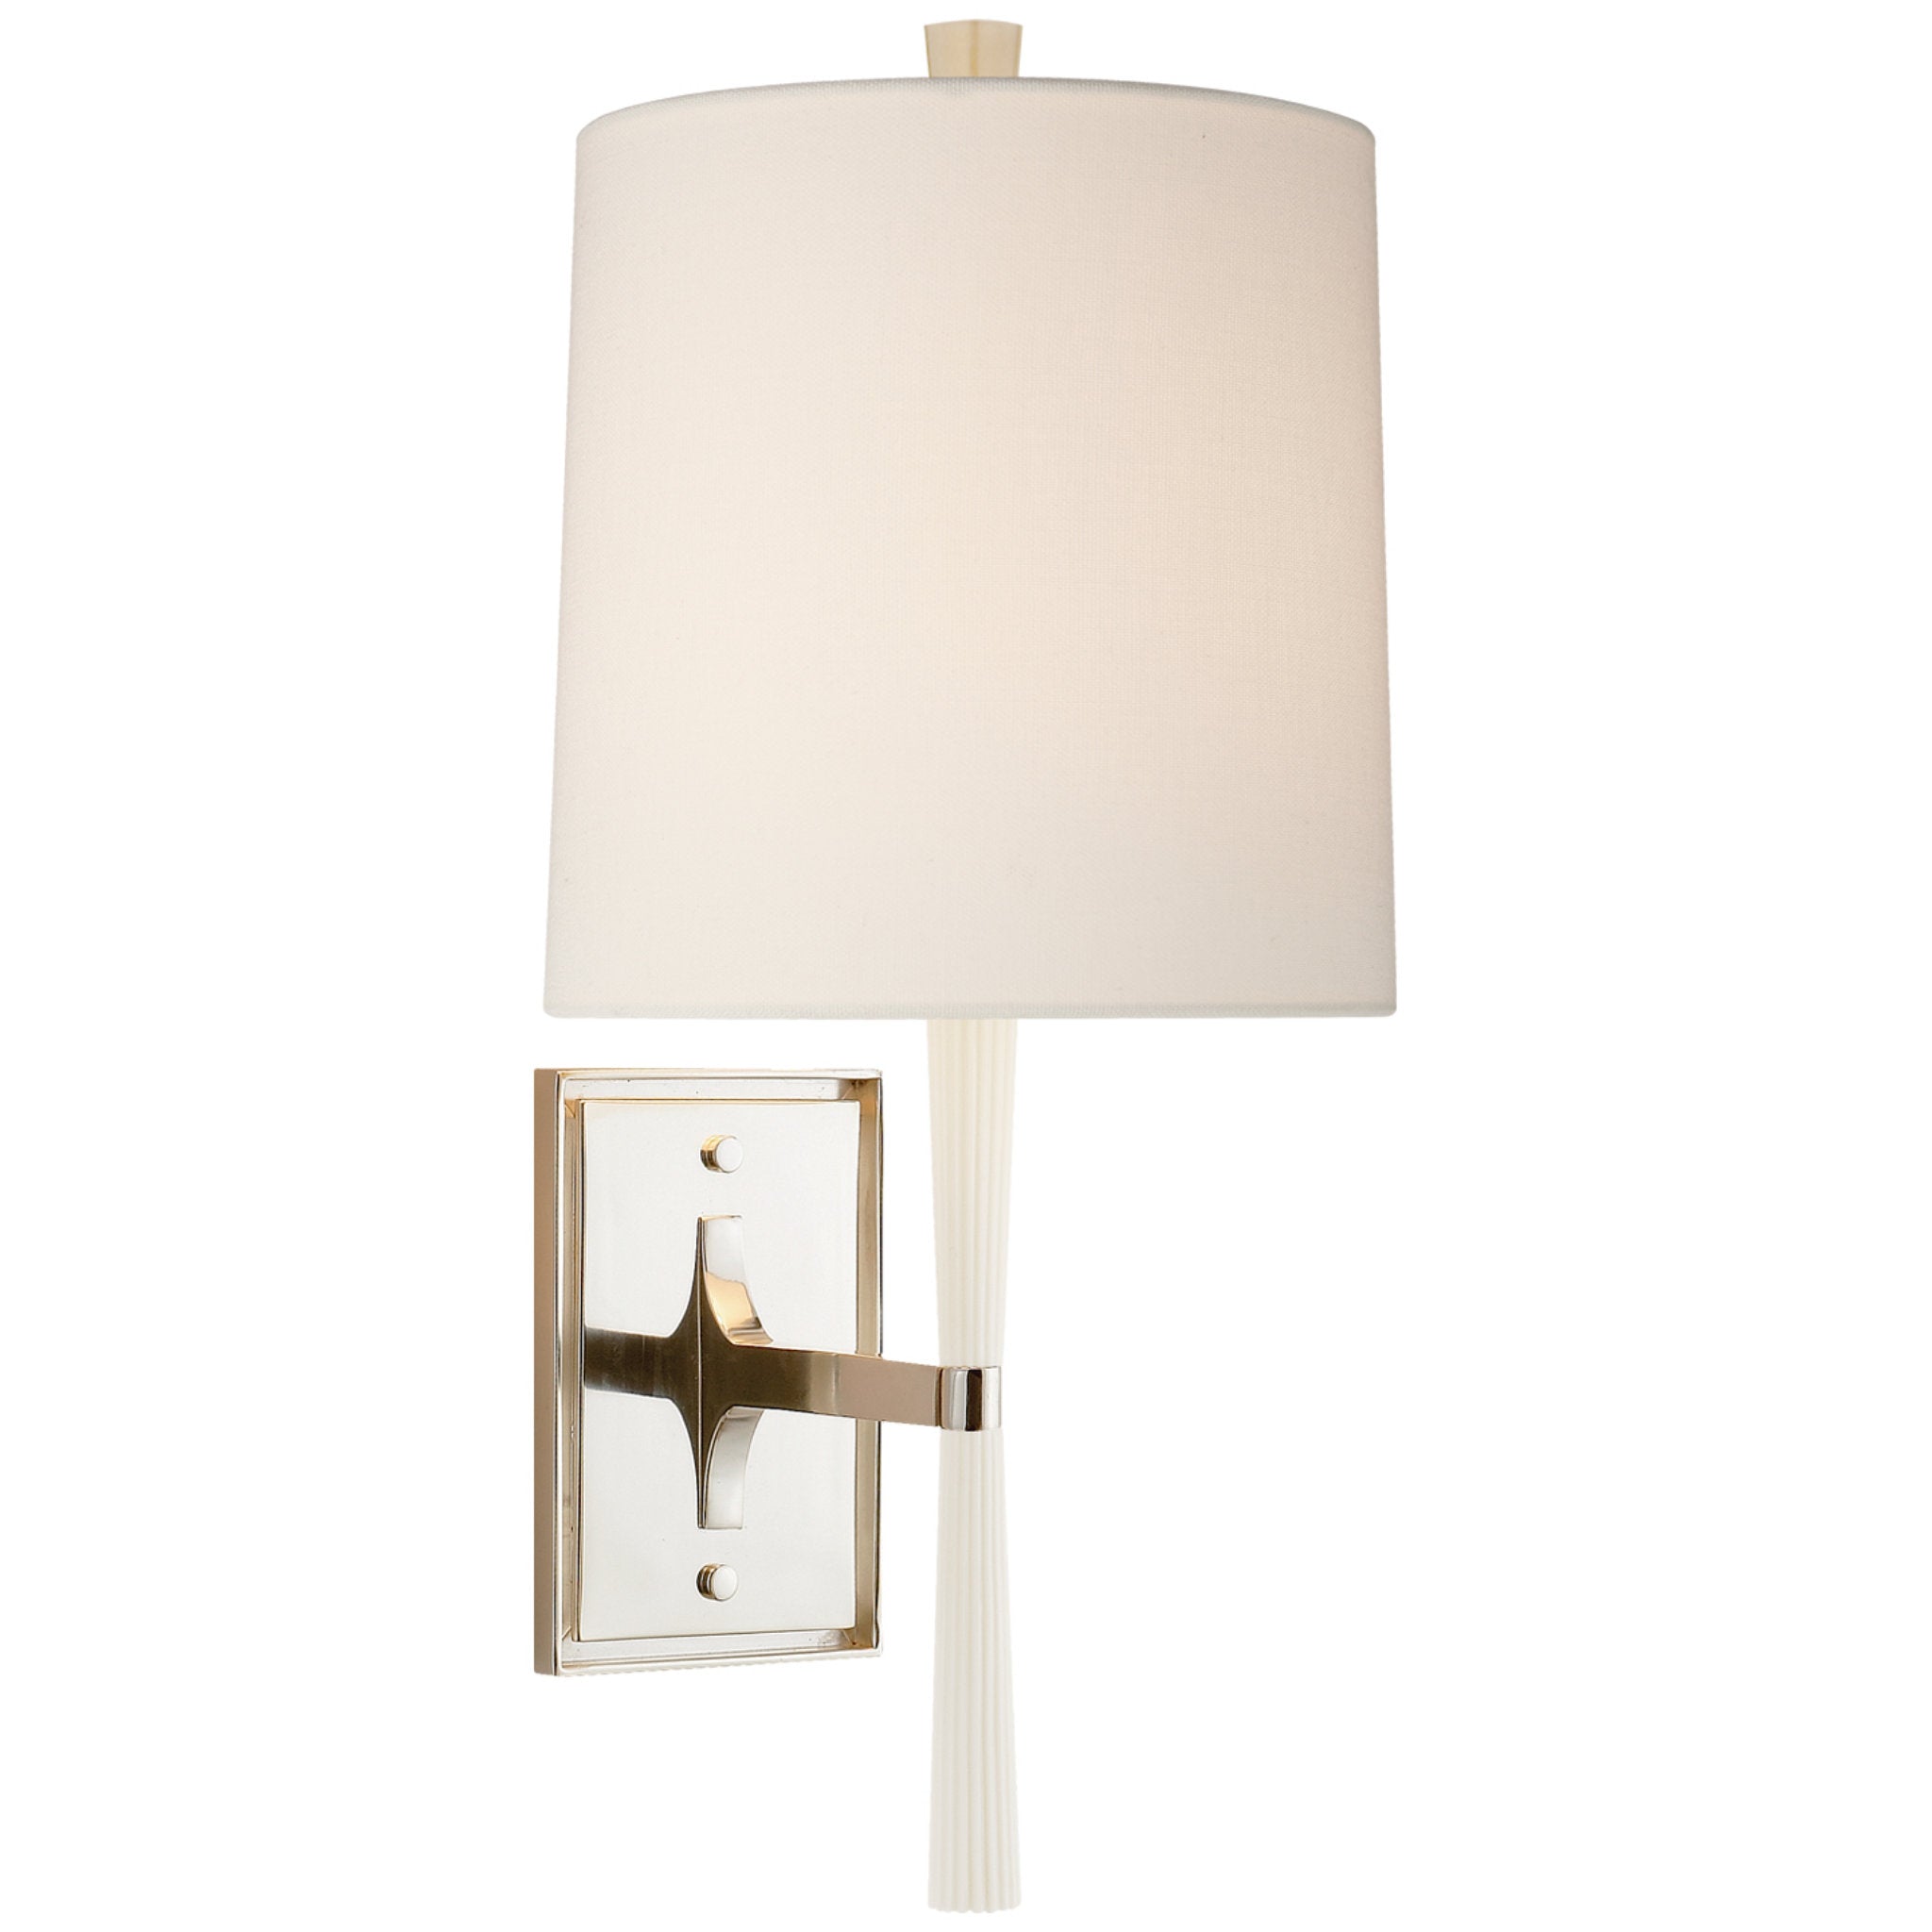 Barbara Barry Refined Rib Sconce in China White and Polished Nickel with Linen Shade